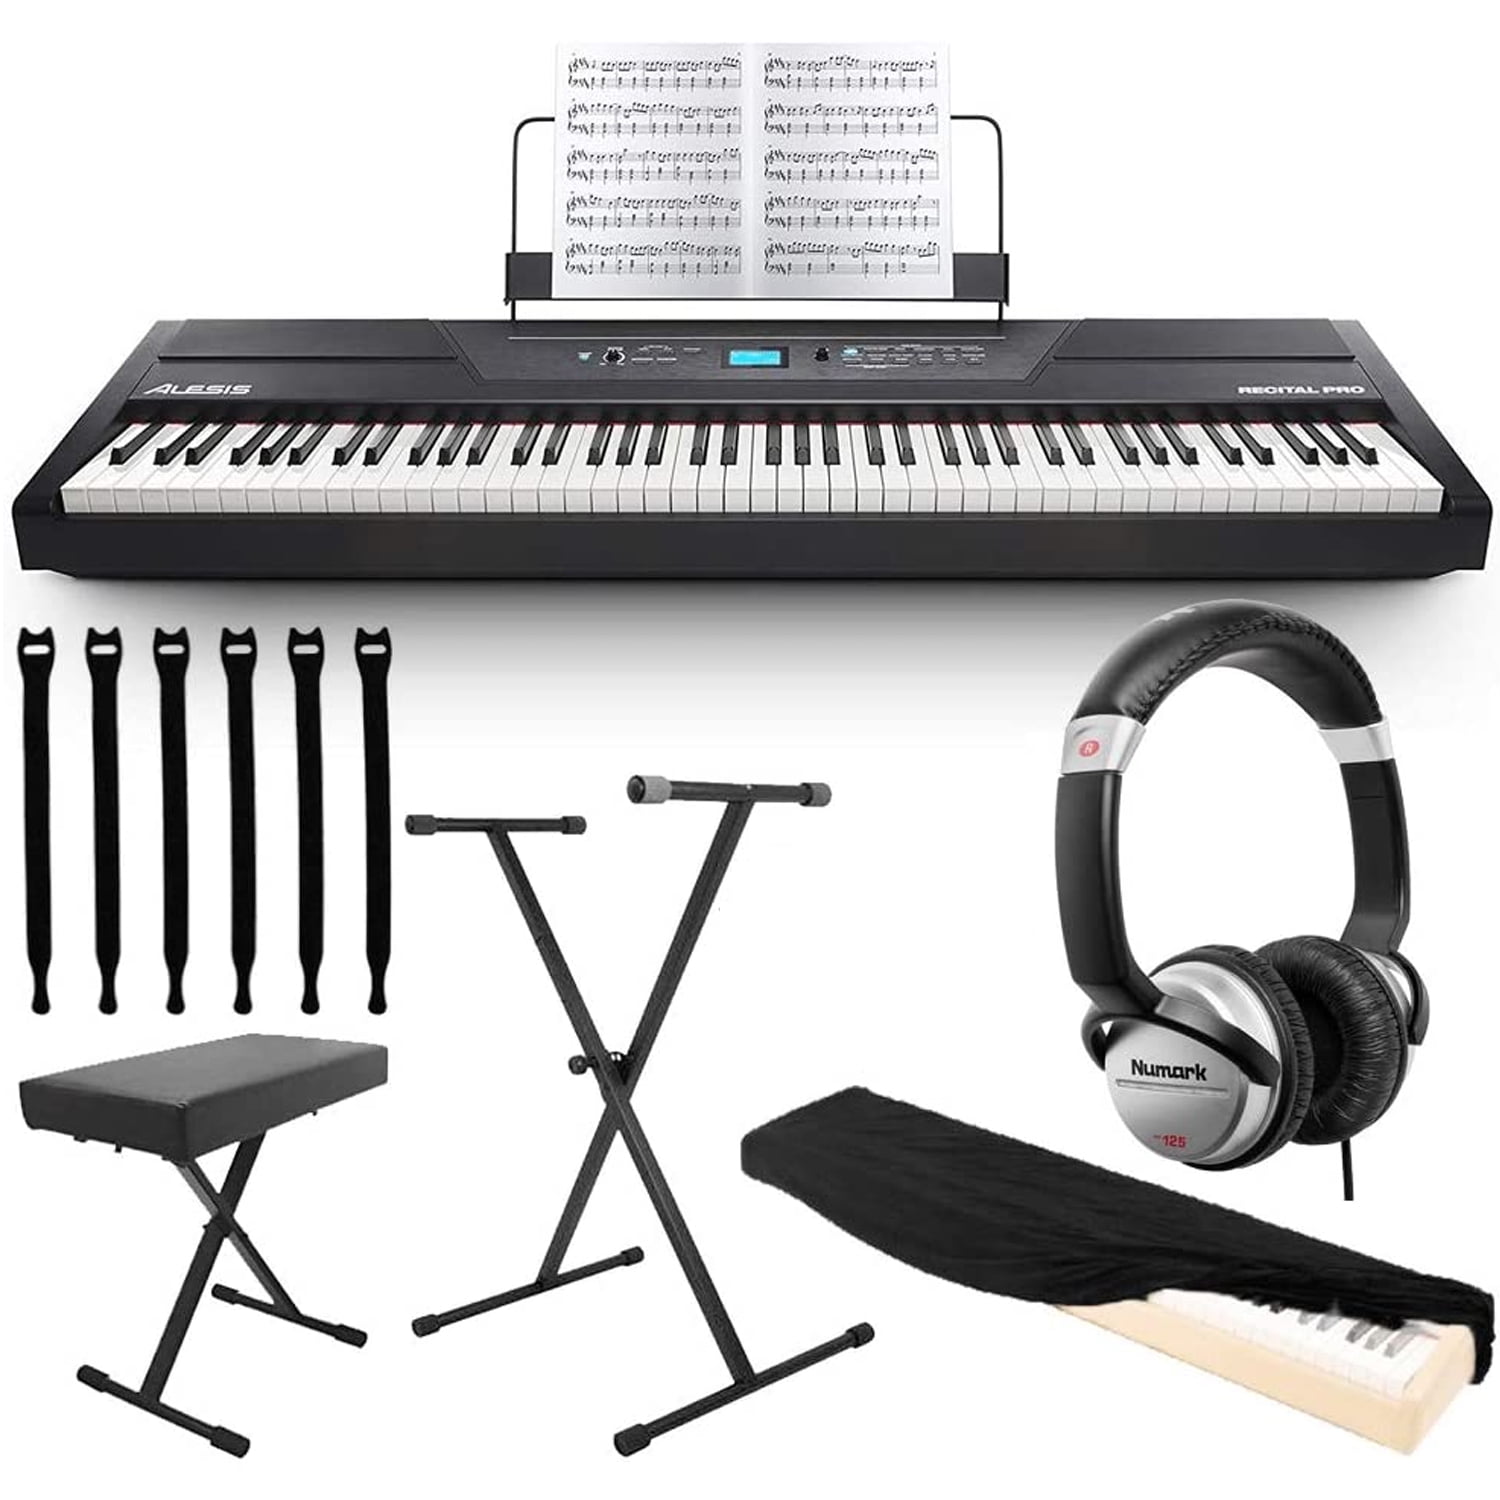 Digital Piano Bundle Electric Keyboard with 88 Weighted Keys 12 Voices and Sustain Pedal – Alesis Recital Pro and M-Audio SP-2 Built-In Speakers 